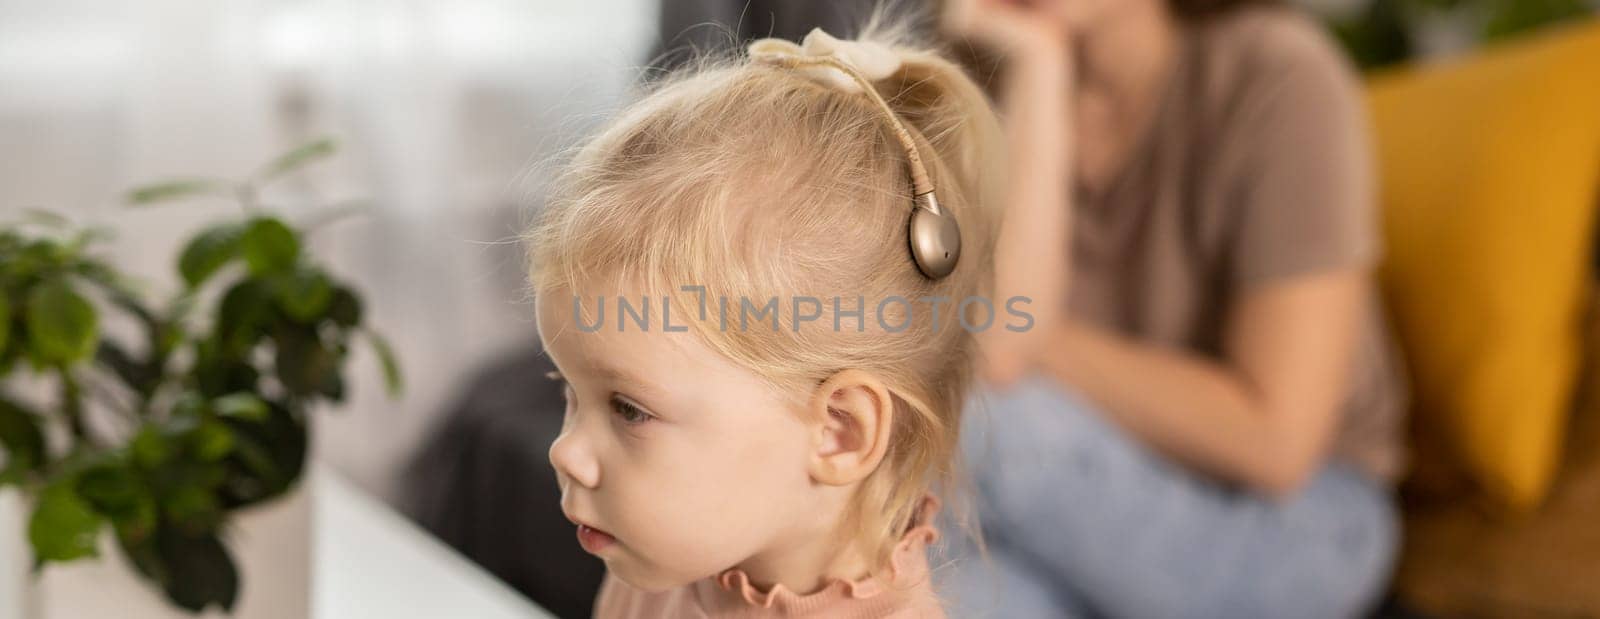 Banner Cochlear implant system copy space. Installation cochlear implant on child girl ear for restores hearing. Kid hears after hear return to normal by Satura86